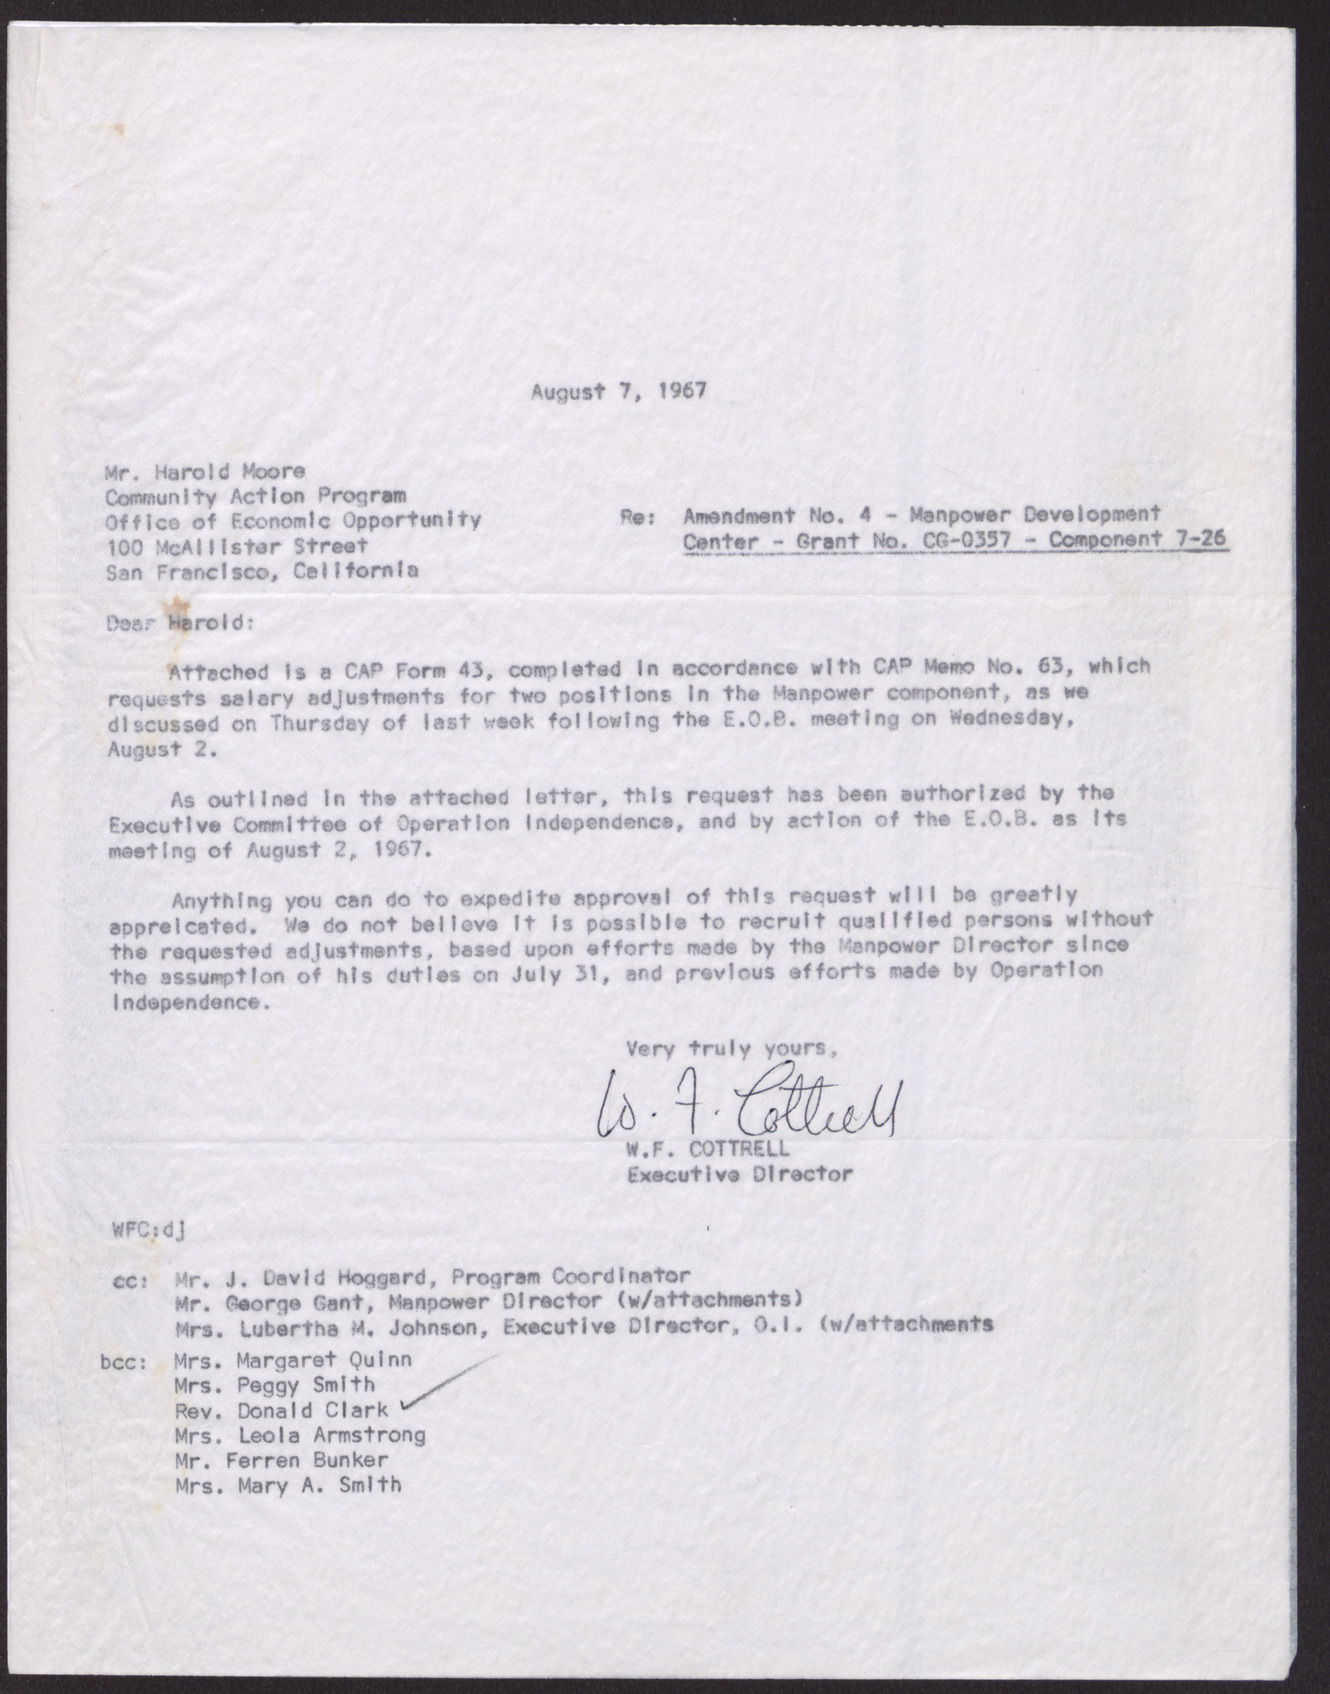 Letter to Mr. Harold Moore from W. F. Cottrell, August 7, 1967